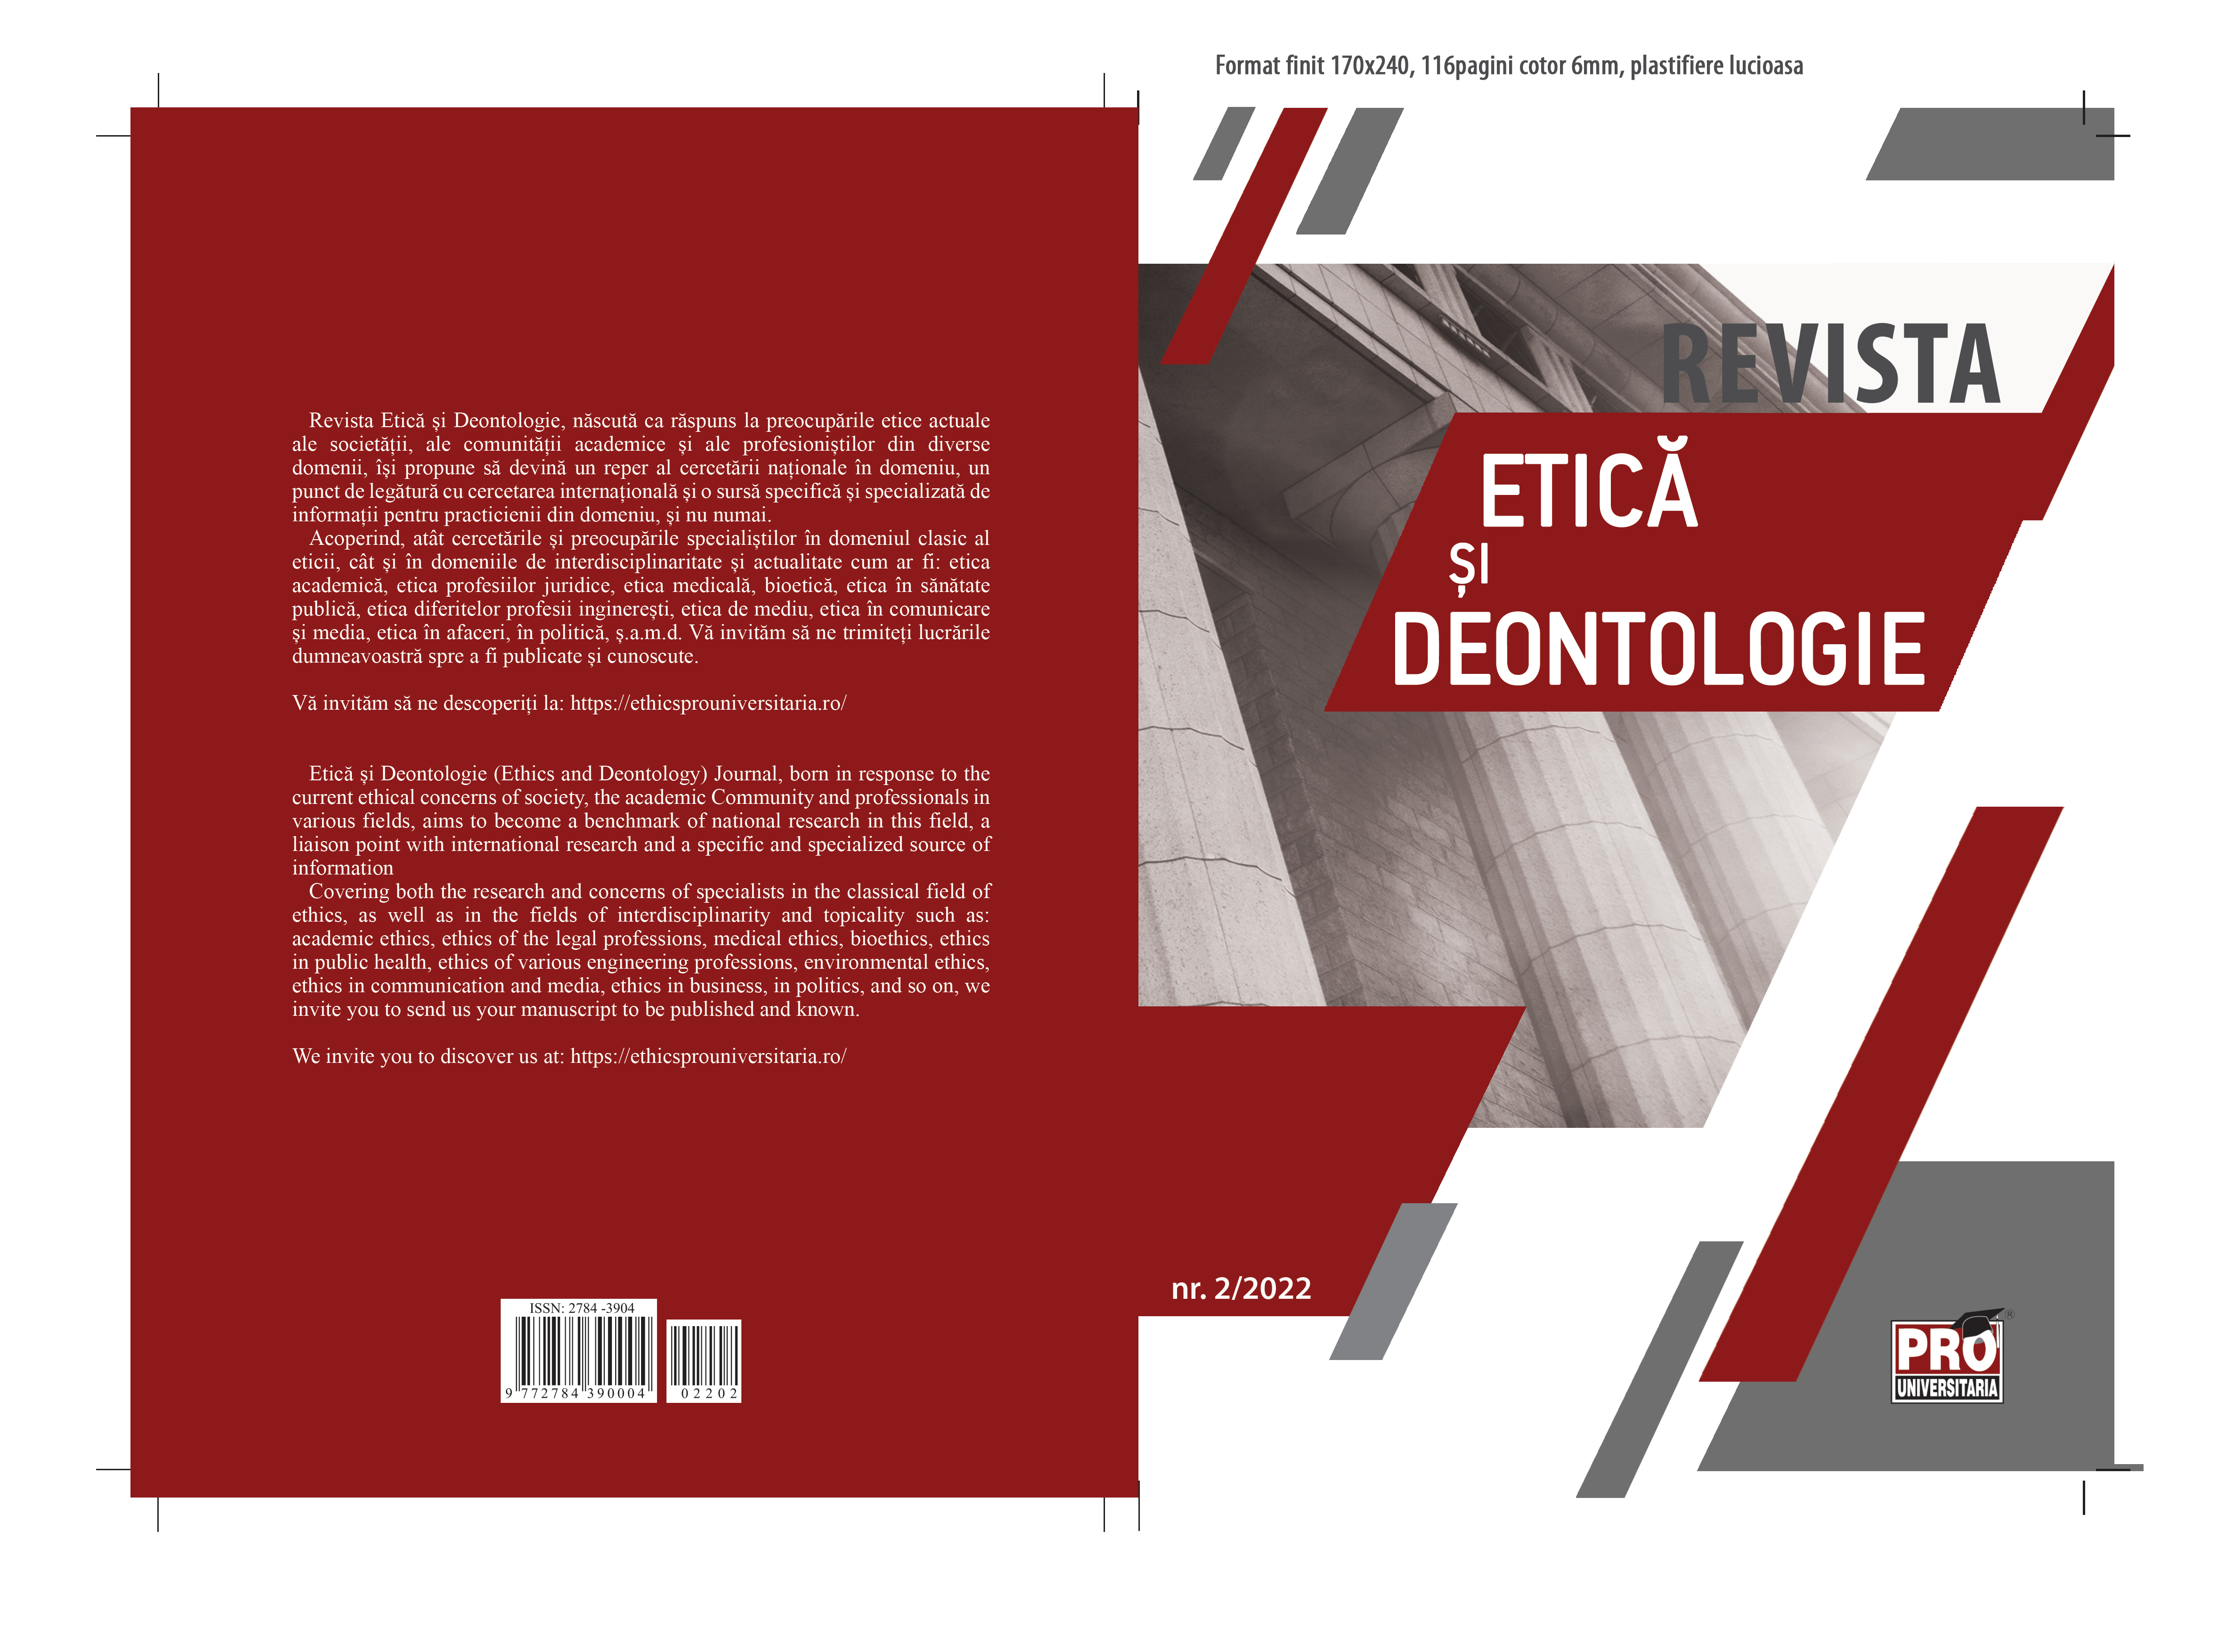 The new vision regarding ethics commissions in the draft law on higher education Cover Image